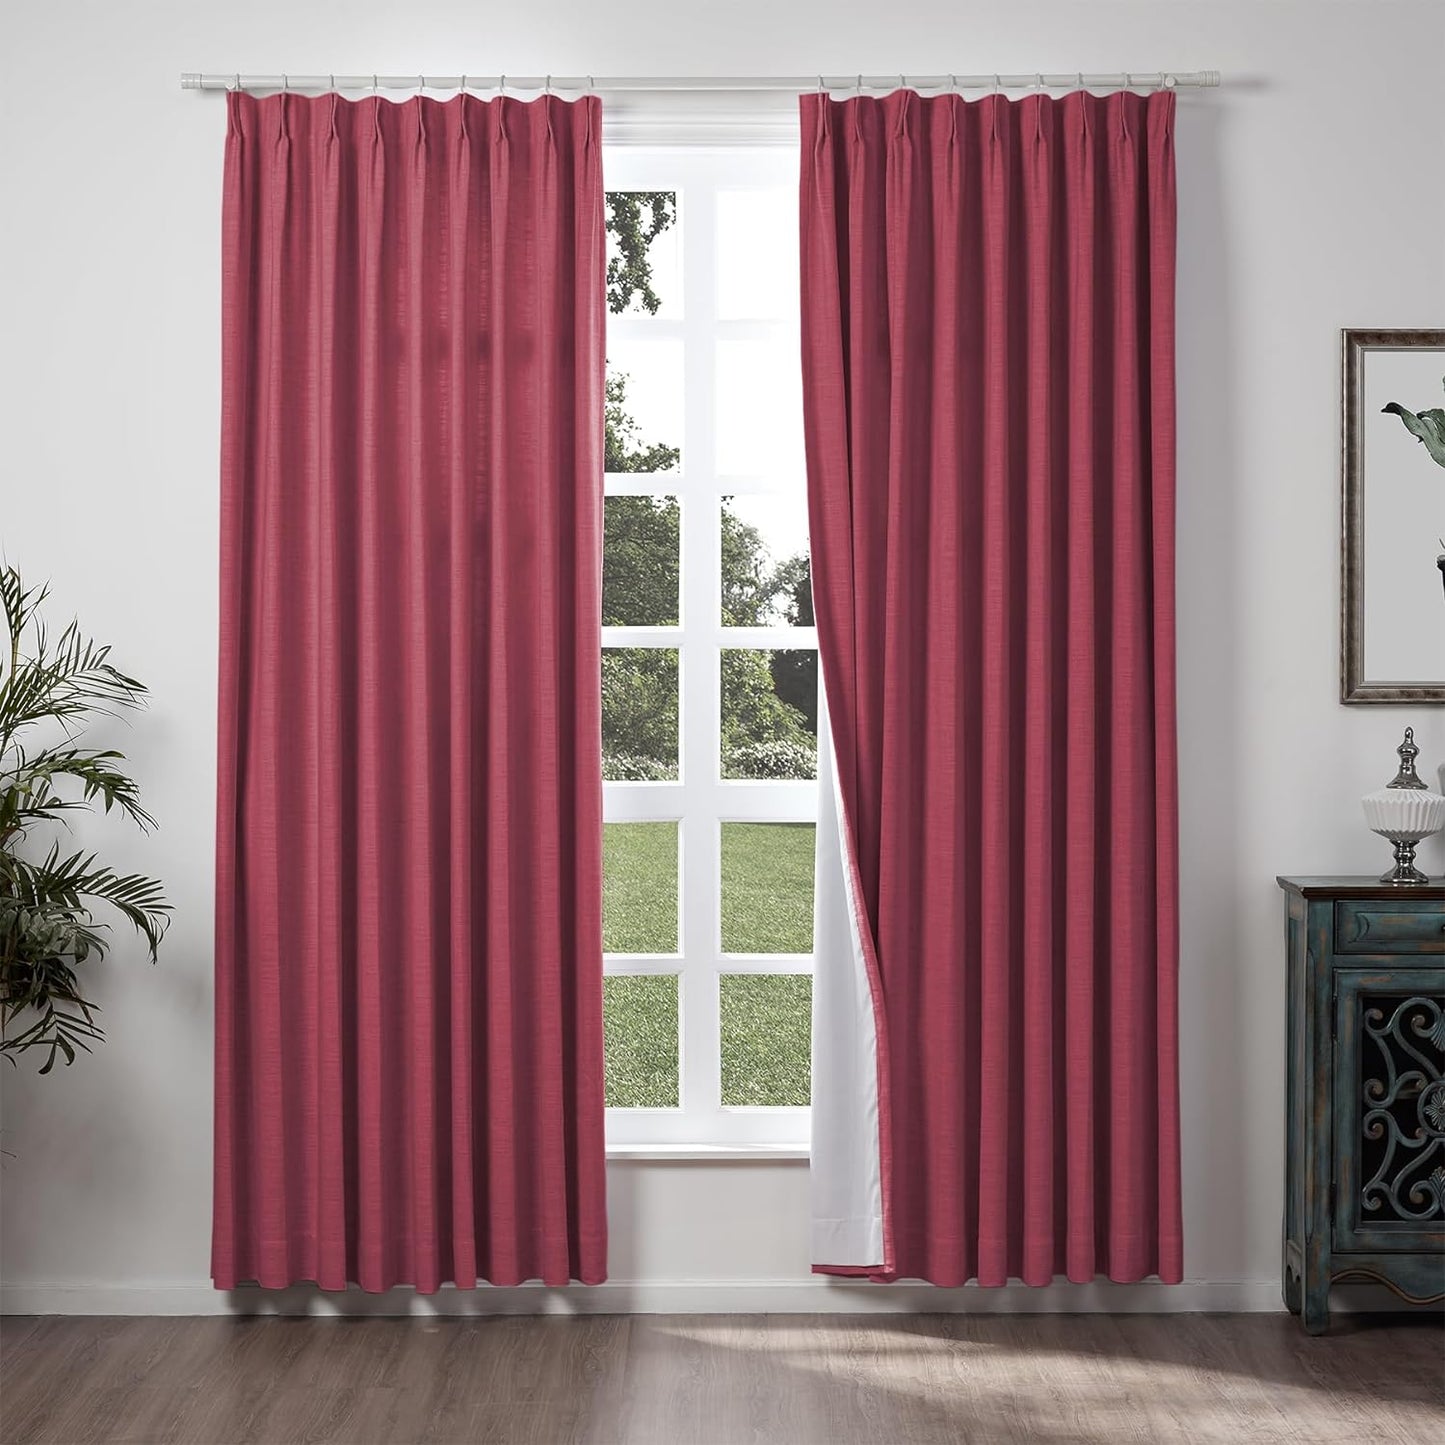 Chadmade 50" W X 84" L Polyester Linen Drape with Blackout Lining Pinch Pleat Curtain for Sliding Door Patio Door Living Room Bedroom, (1 Panel) Beige White Liz Collection  ChadMade Red Wine (23) 72Wx84L 